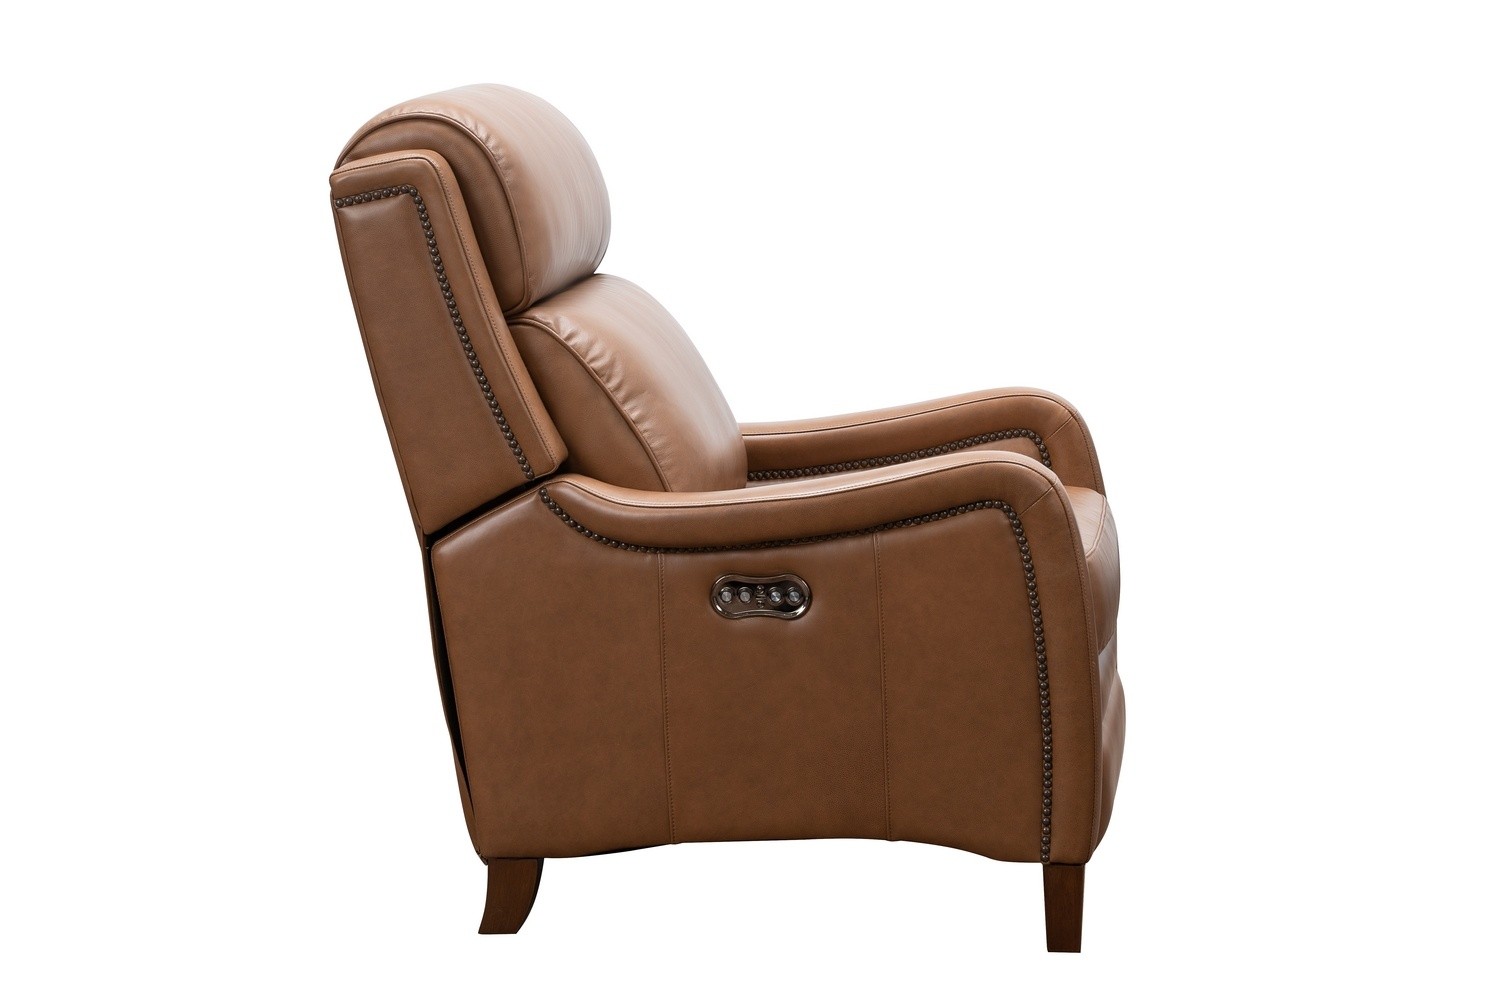 Barcalounger Williamson Power Recliner Chair with Power Head Rest - Bennington Saddle/All Leather